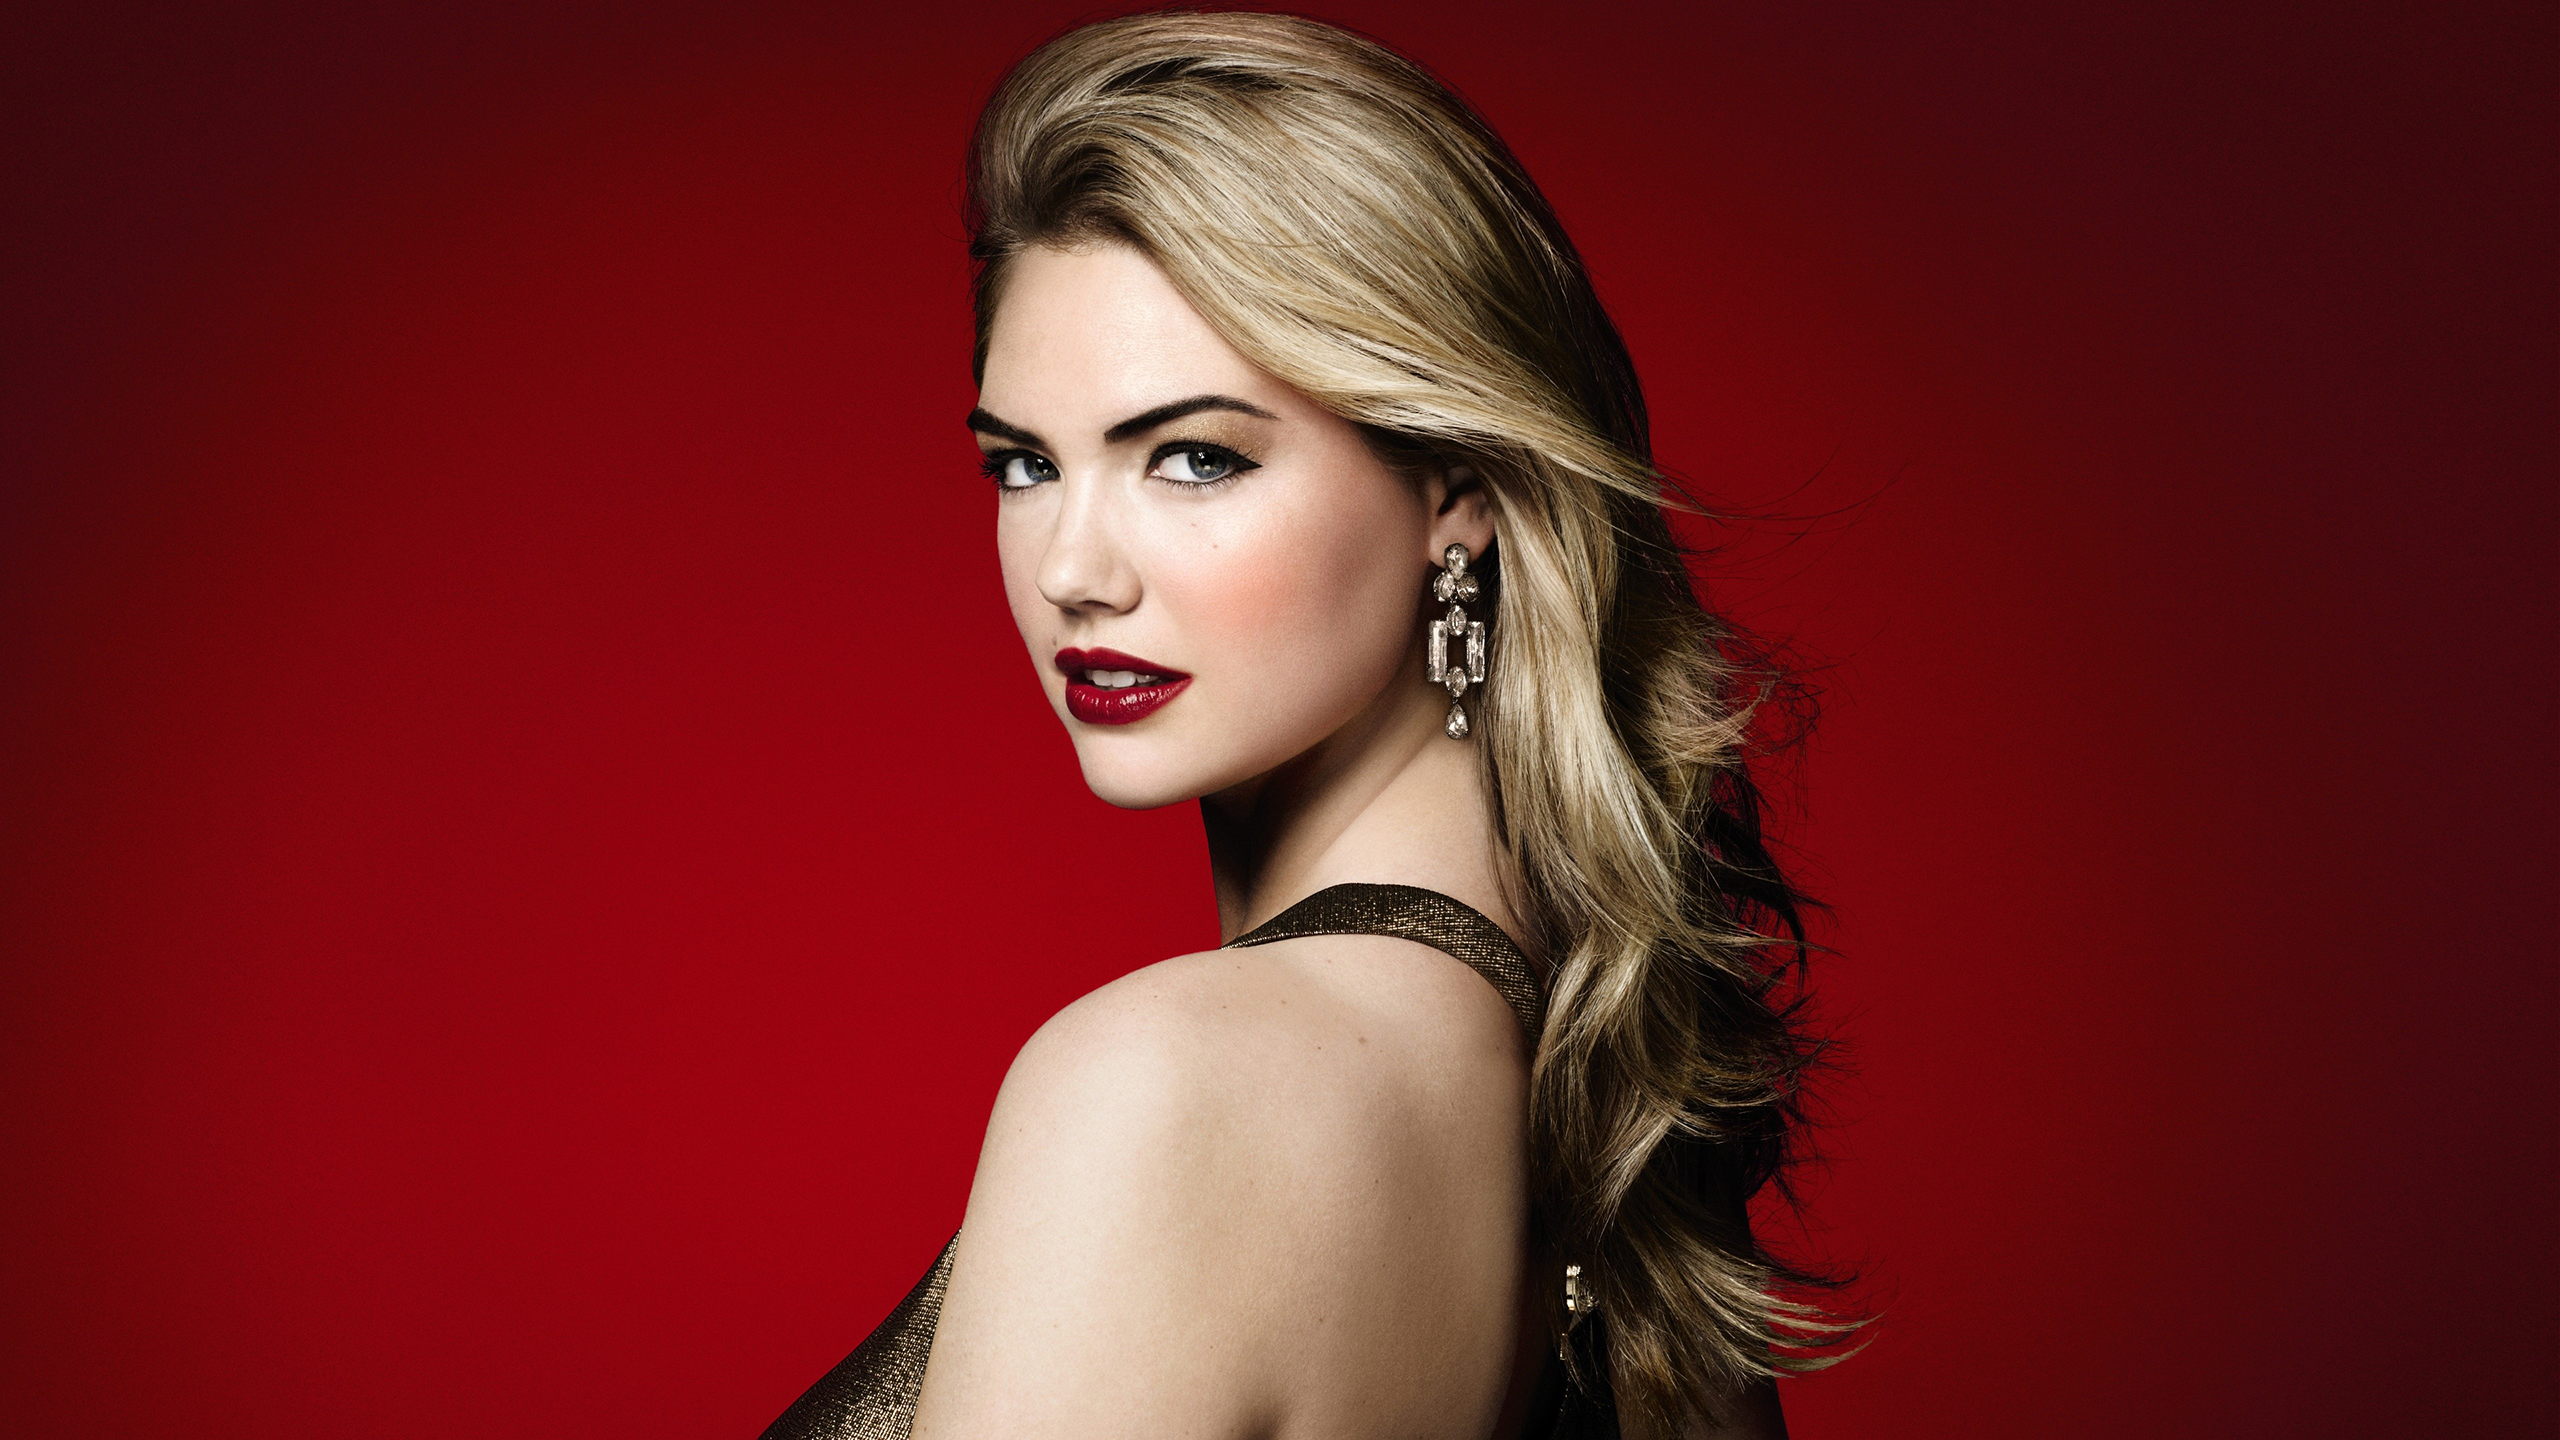 People 2560x1440 Kate Upton women model simple background classy red lipstick makeup red background glamour Caucasian American women glamour girls parted lips portrait earring American Model